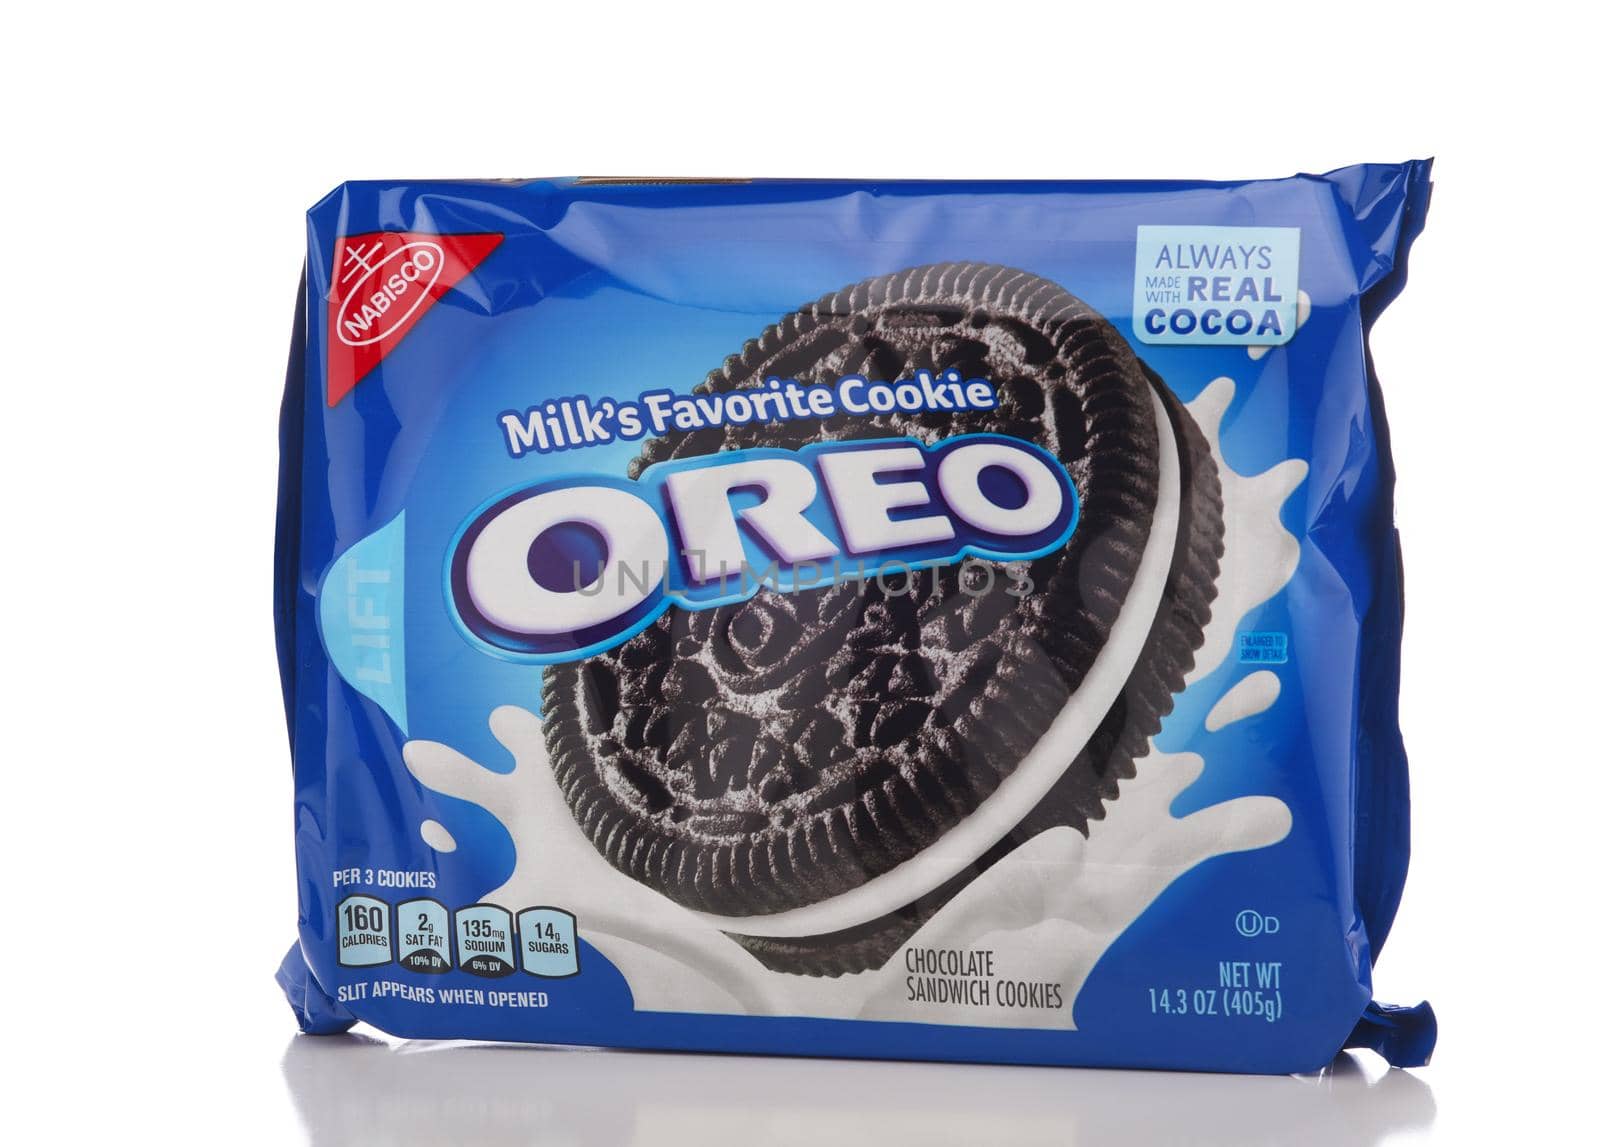 IRVINE, CALIFORNIA - APRIL 30, 2019: A package of Oreo Cookies from Nabisco. Milks Favorite Cookie.